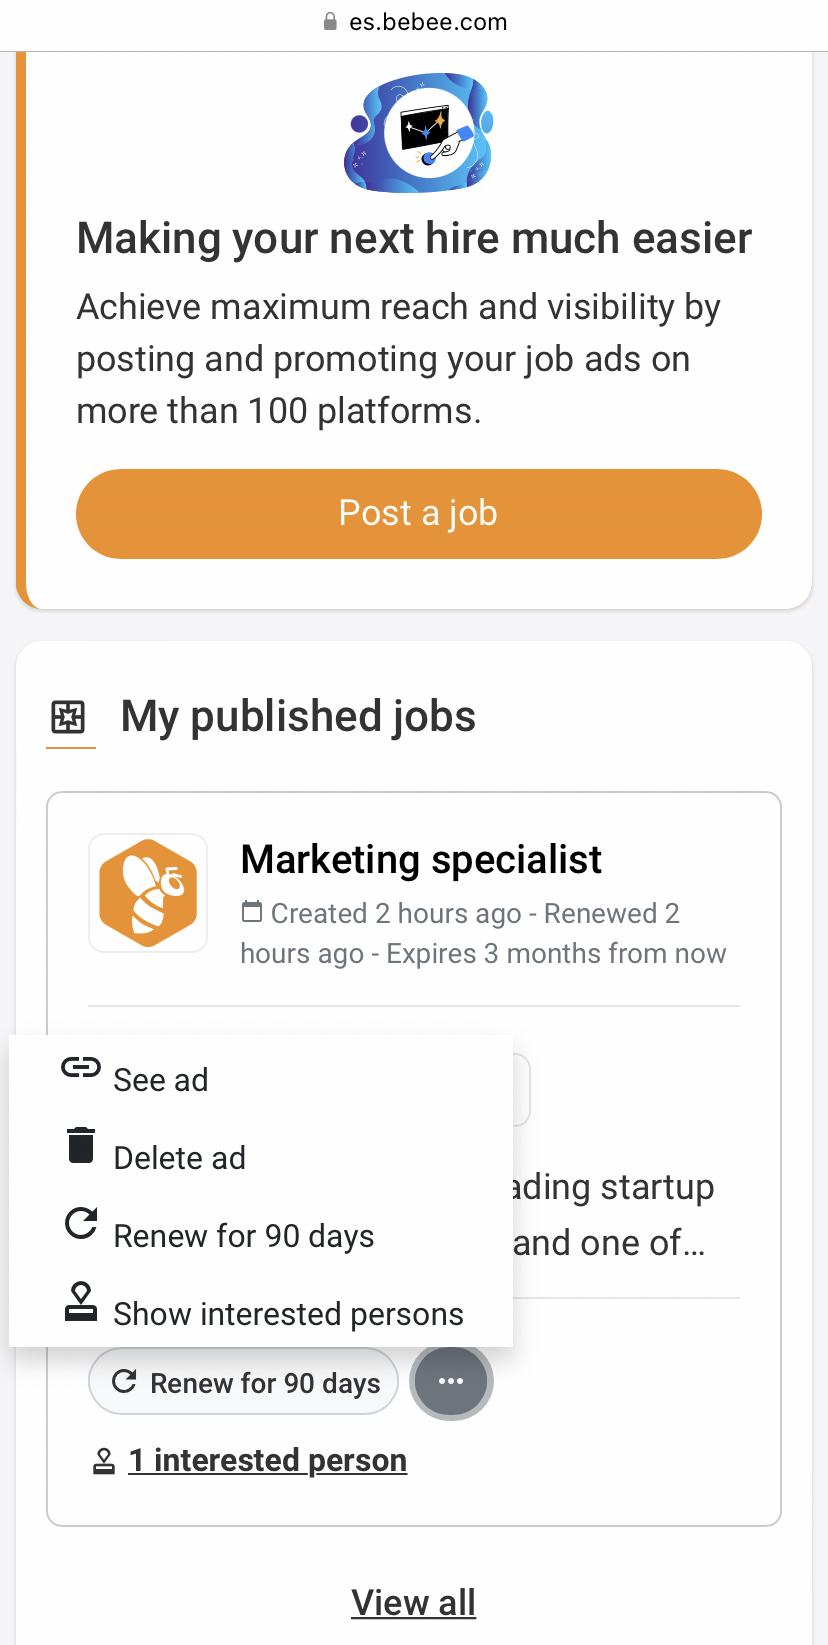 # es.bebee.com

Making your next hire much easier

Achieve maximum reach and visibility by
posting and promoting your job ads on
more than 100 platforms.

B My published jobs

Marketing specialist
8 Created 2 hours ago - Renewed 2

hours ago - Expires 3 months from now

© gee ad
® Delete ad .

ding startup
Cc Renew for 90 days and one of...

& Show interested persons

IEE
C Renew for 90 days a

& 1 interested person

View all